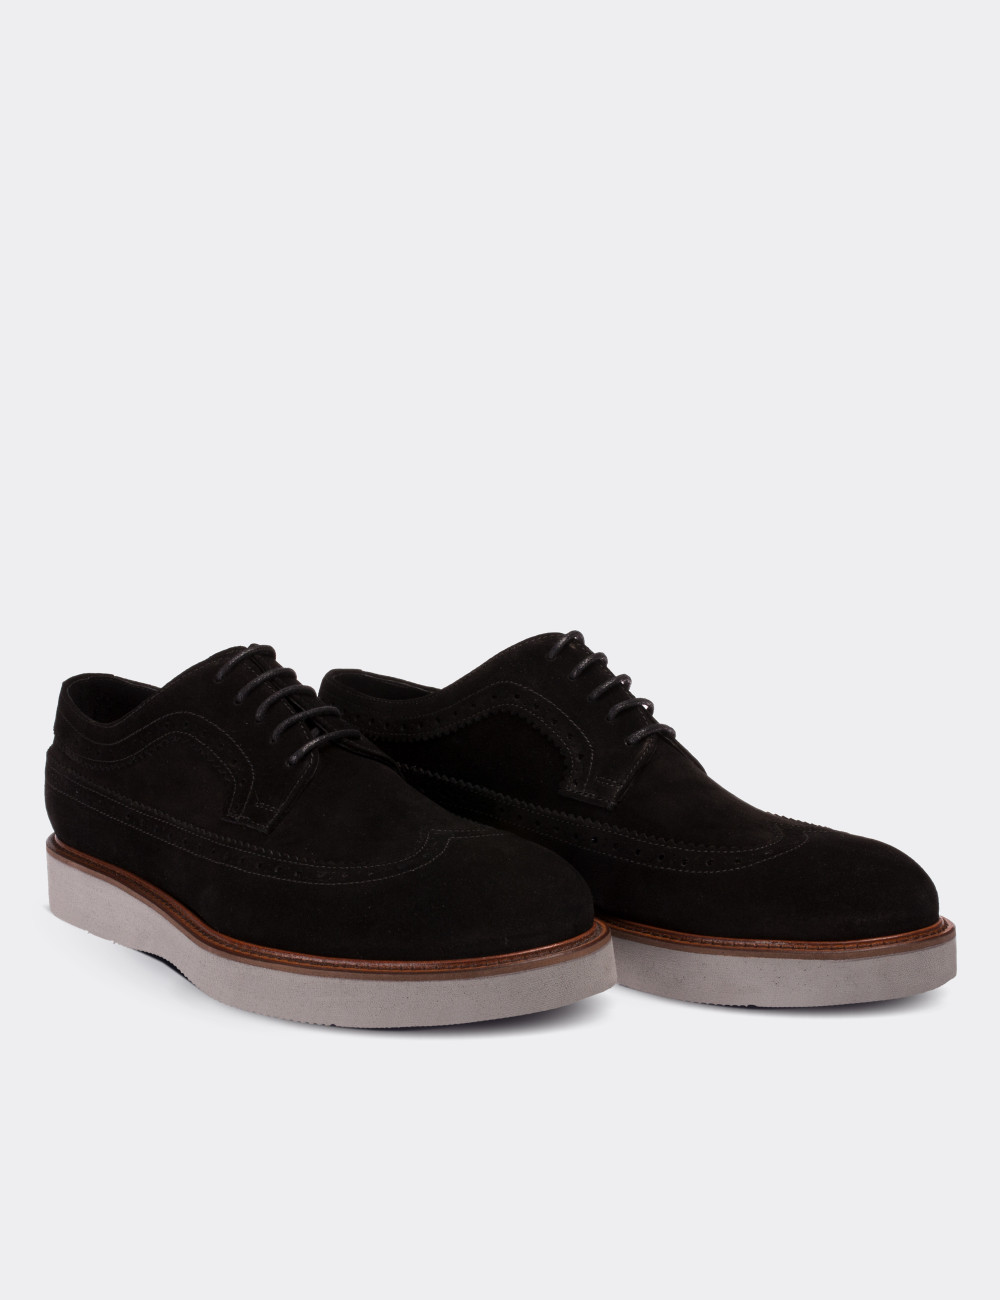 Black Suede Leather Lace-up Shoes - 01293MSYHE29